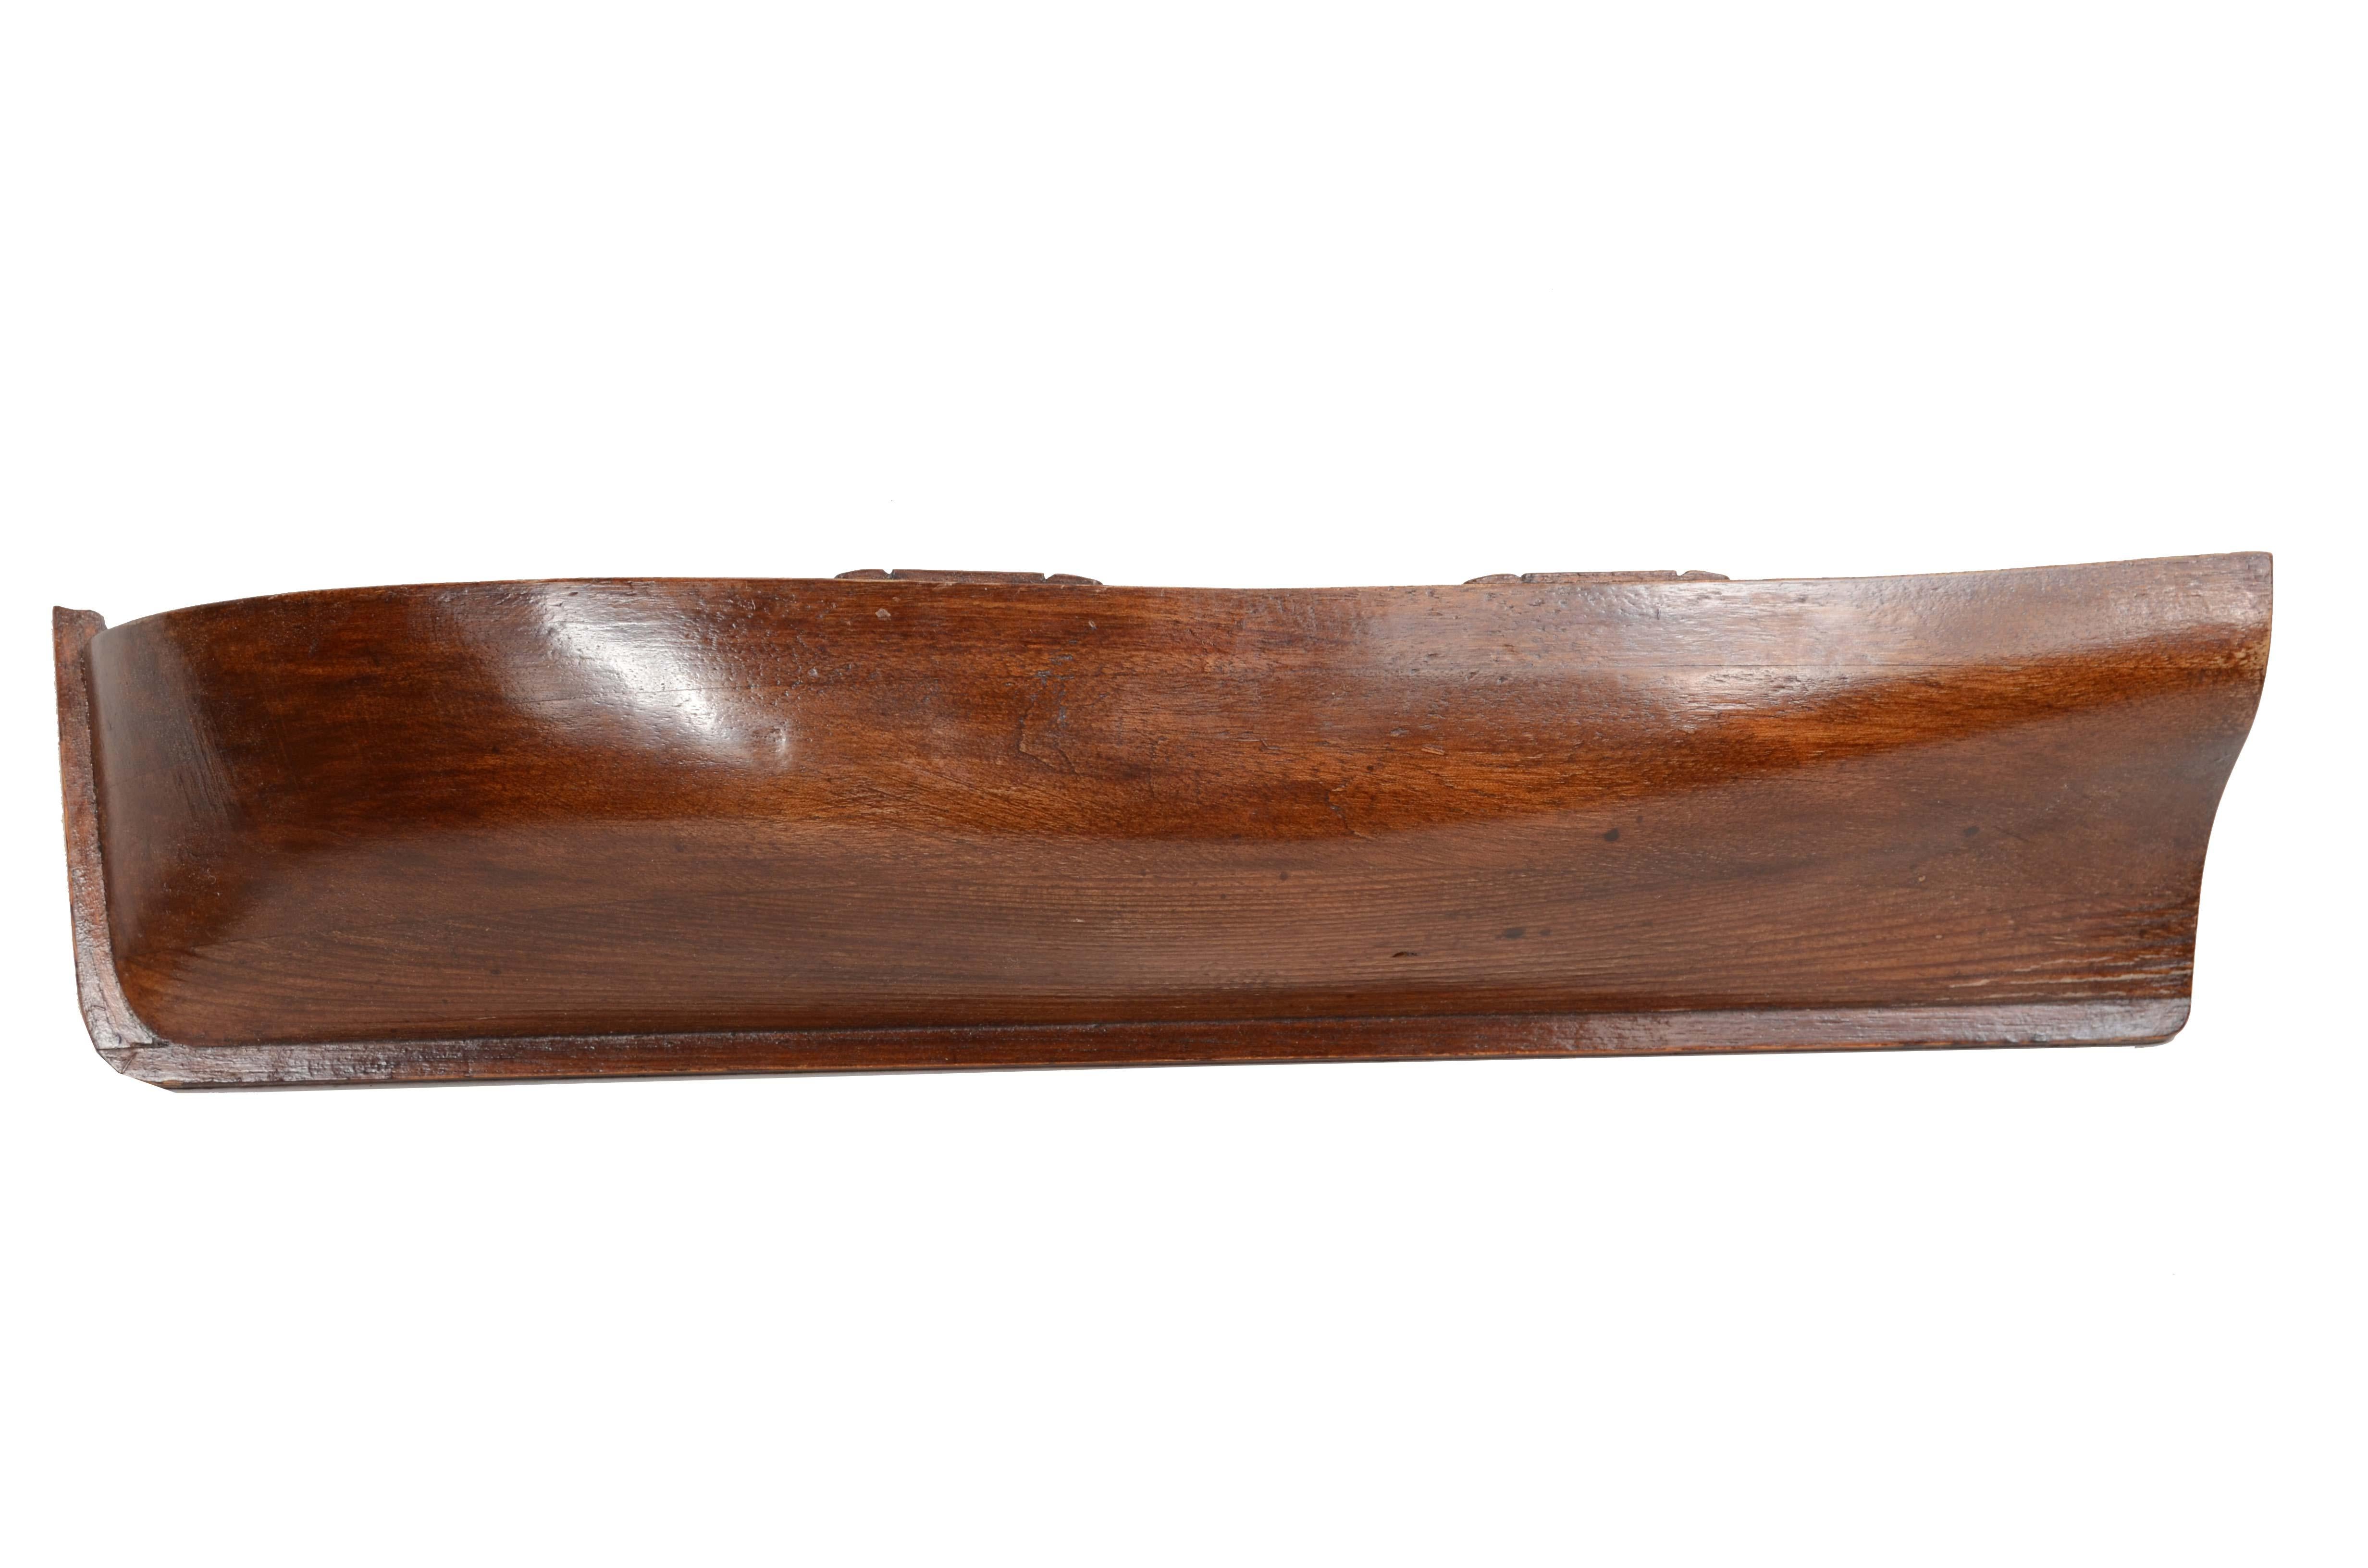 Early 20th century half hull of an English schooner  in oak wood.  
Good condition measures 42.5 x7.5x9.5 cm - inches 16.8x3x3.8. 
The half-hull, used to design boats, was the tool for shipwrights to see in advance the shapes of the boats or ships